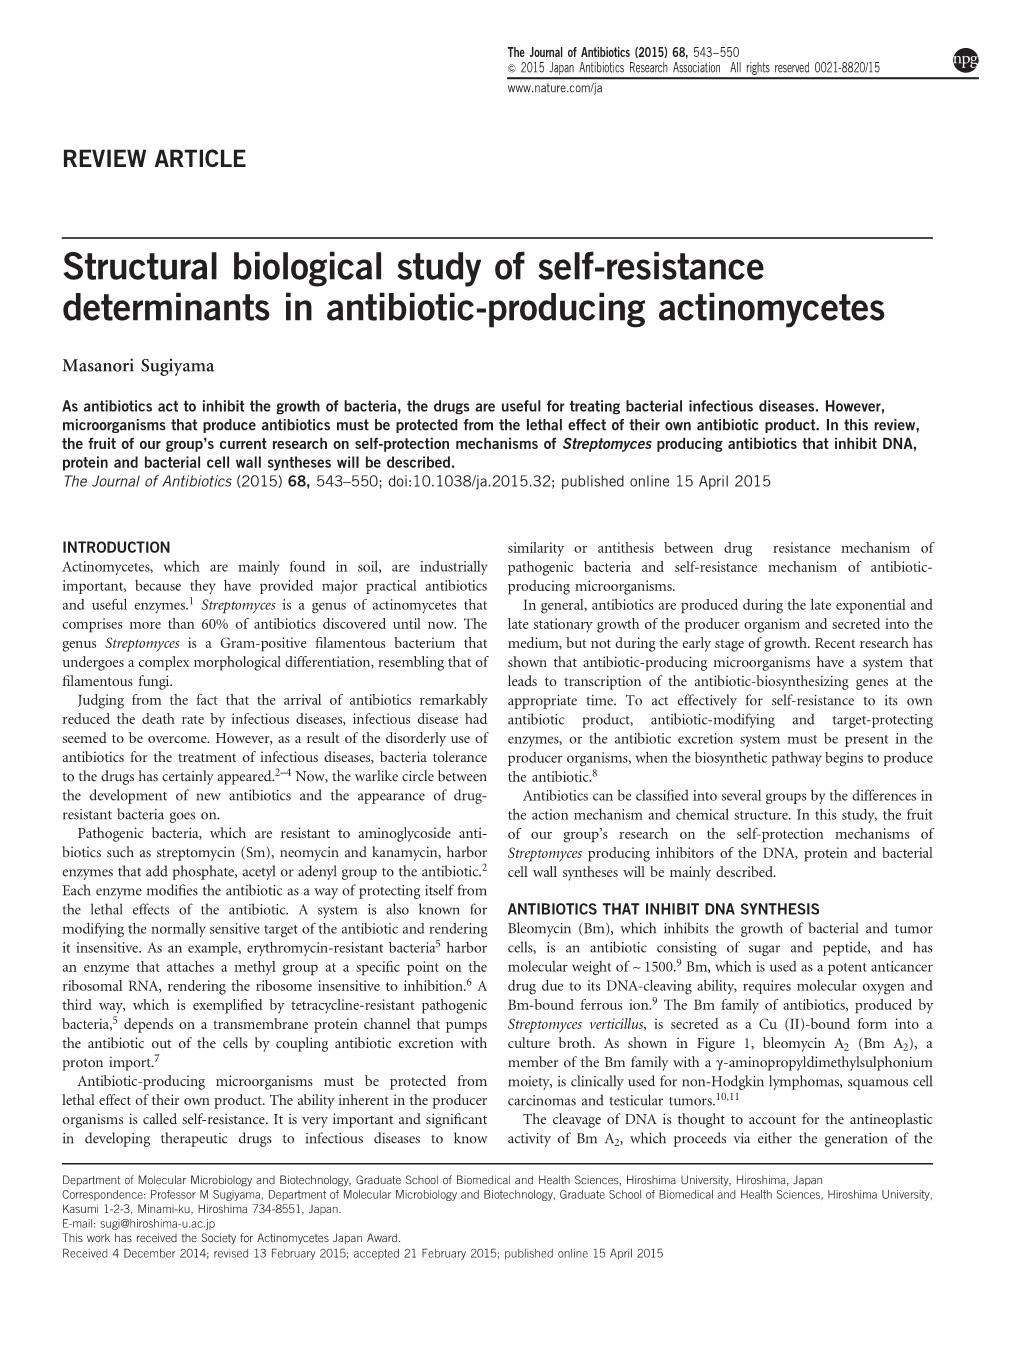 Structural Biological Study of Self-Resistance Determinants in Antibiotic-Producing Actinomycetes